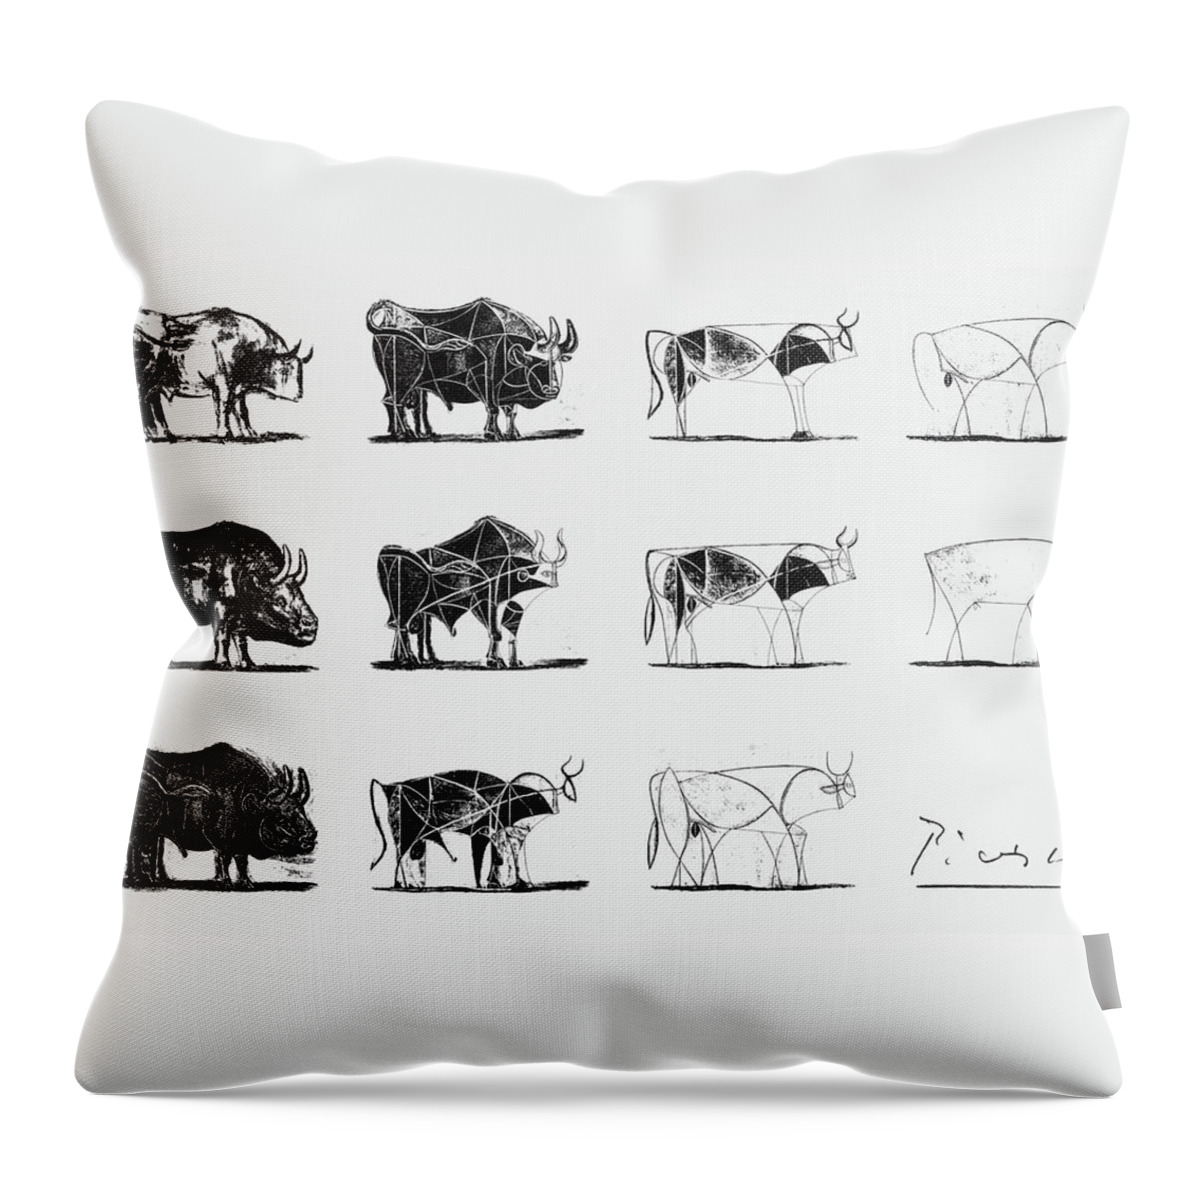 Bull Throw Pillow featuring the drawing The Bull series by Pablo Picasso